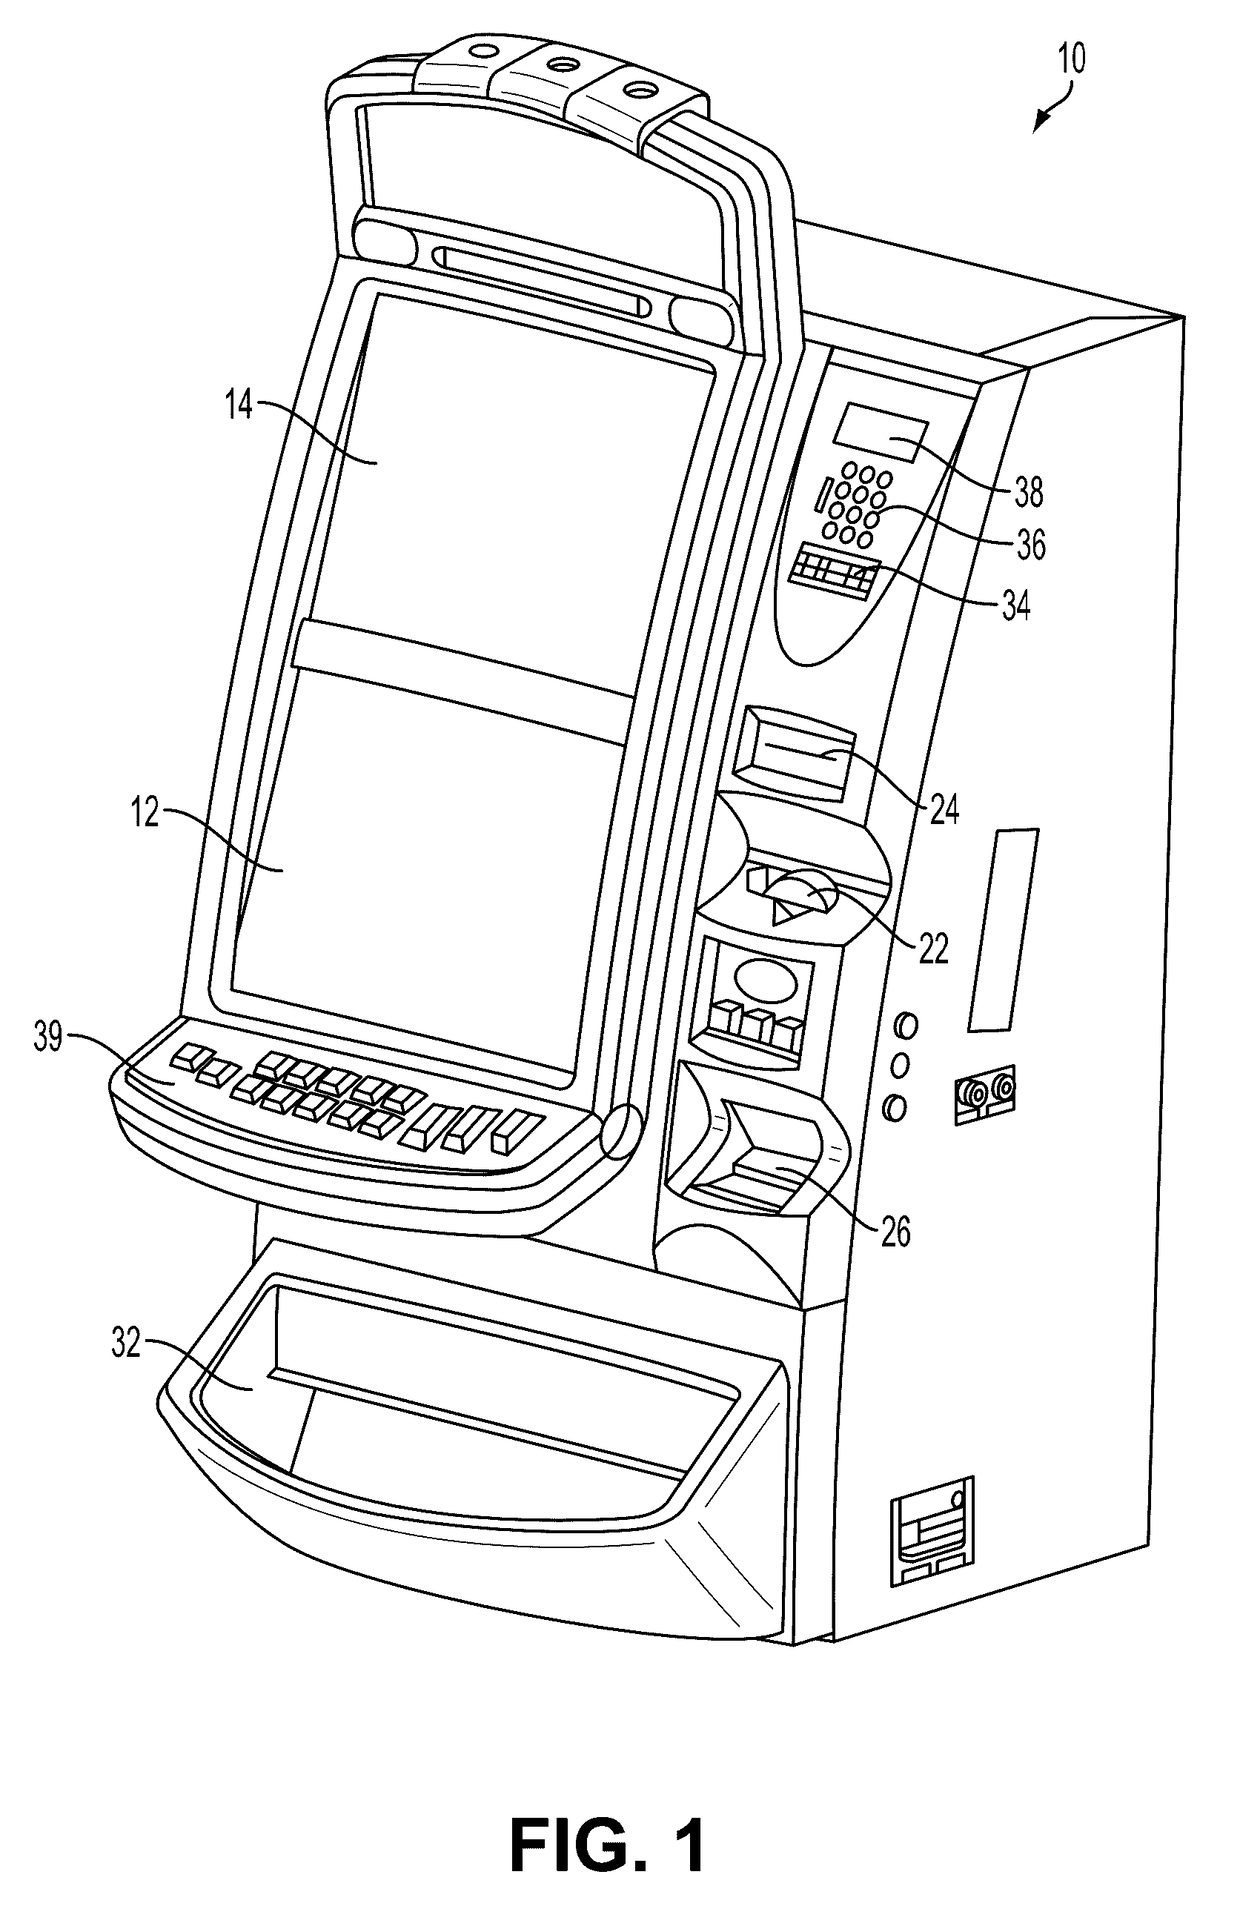 Enhanced electronic gaming machine with x-ray vision display